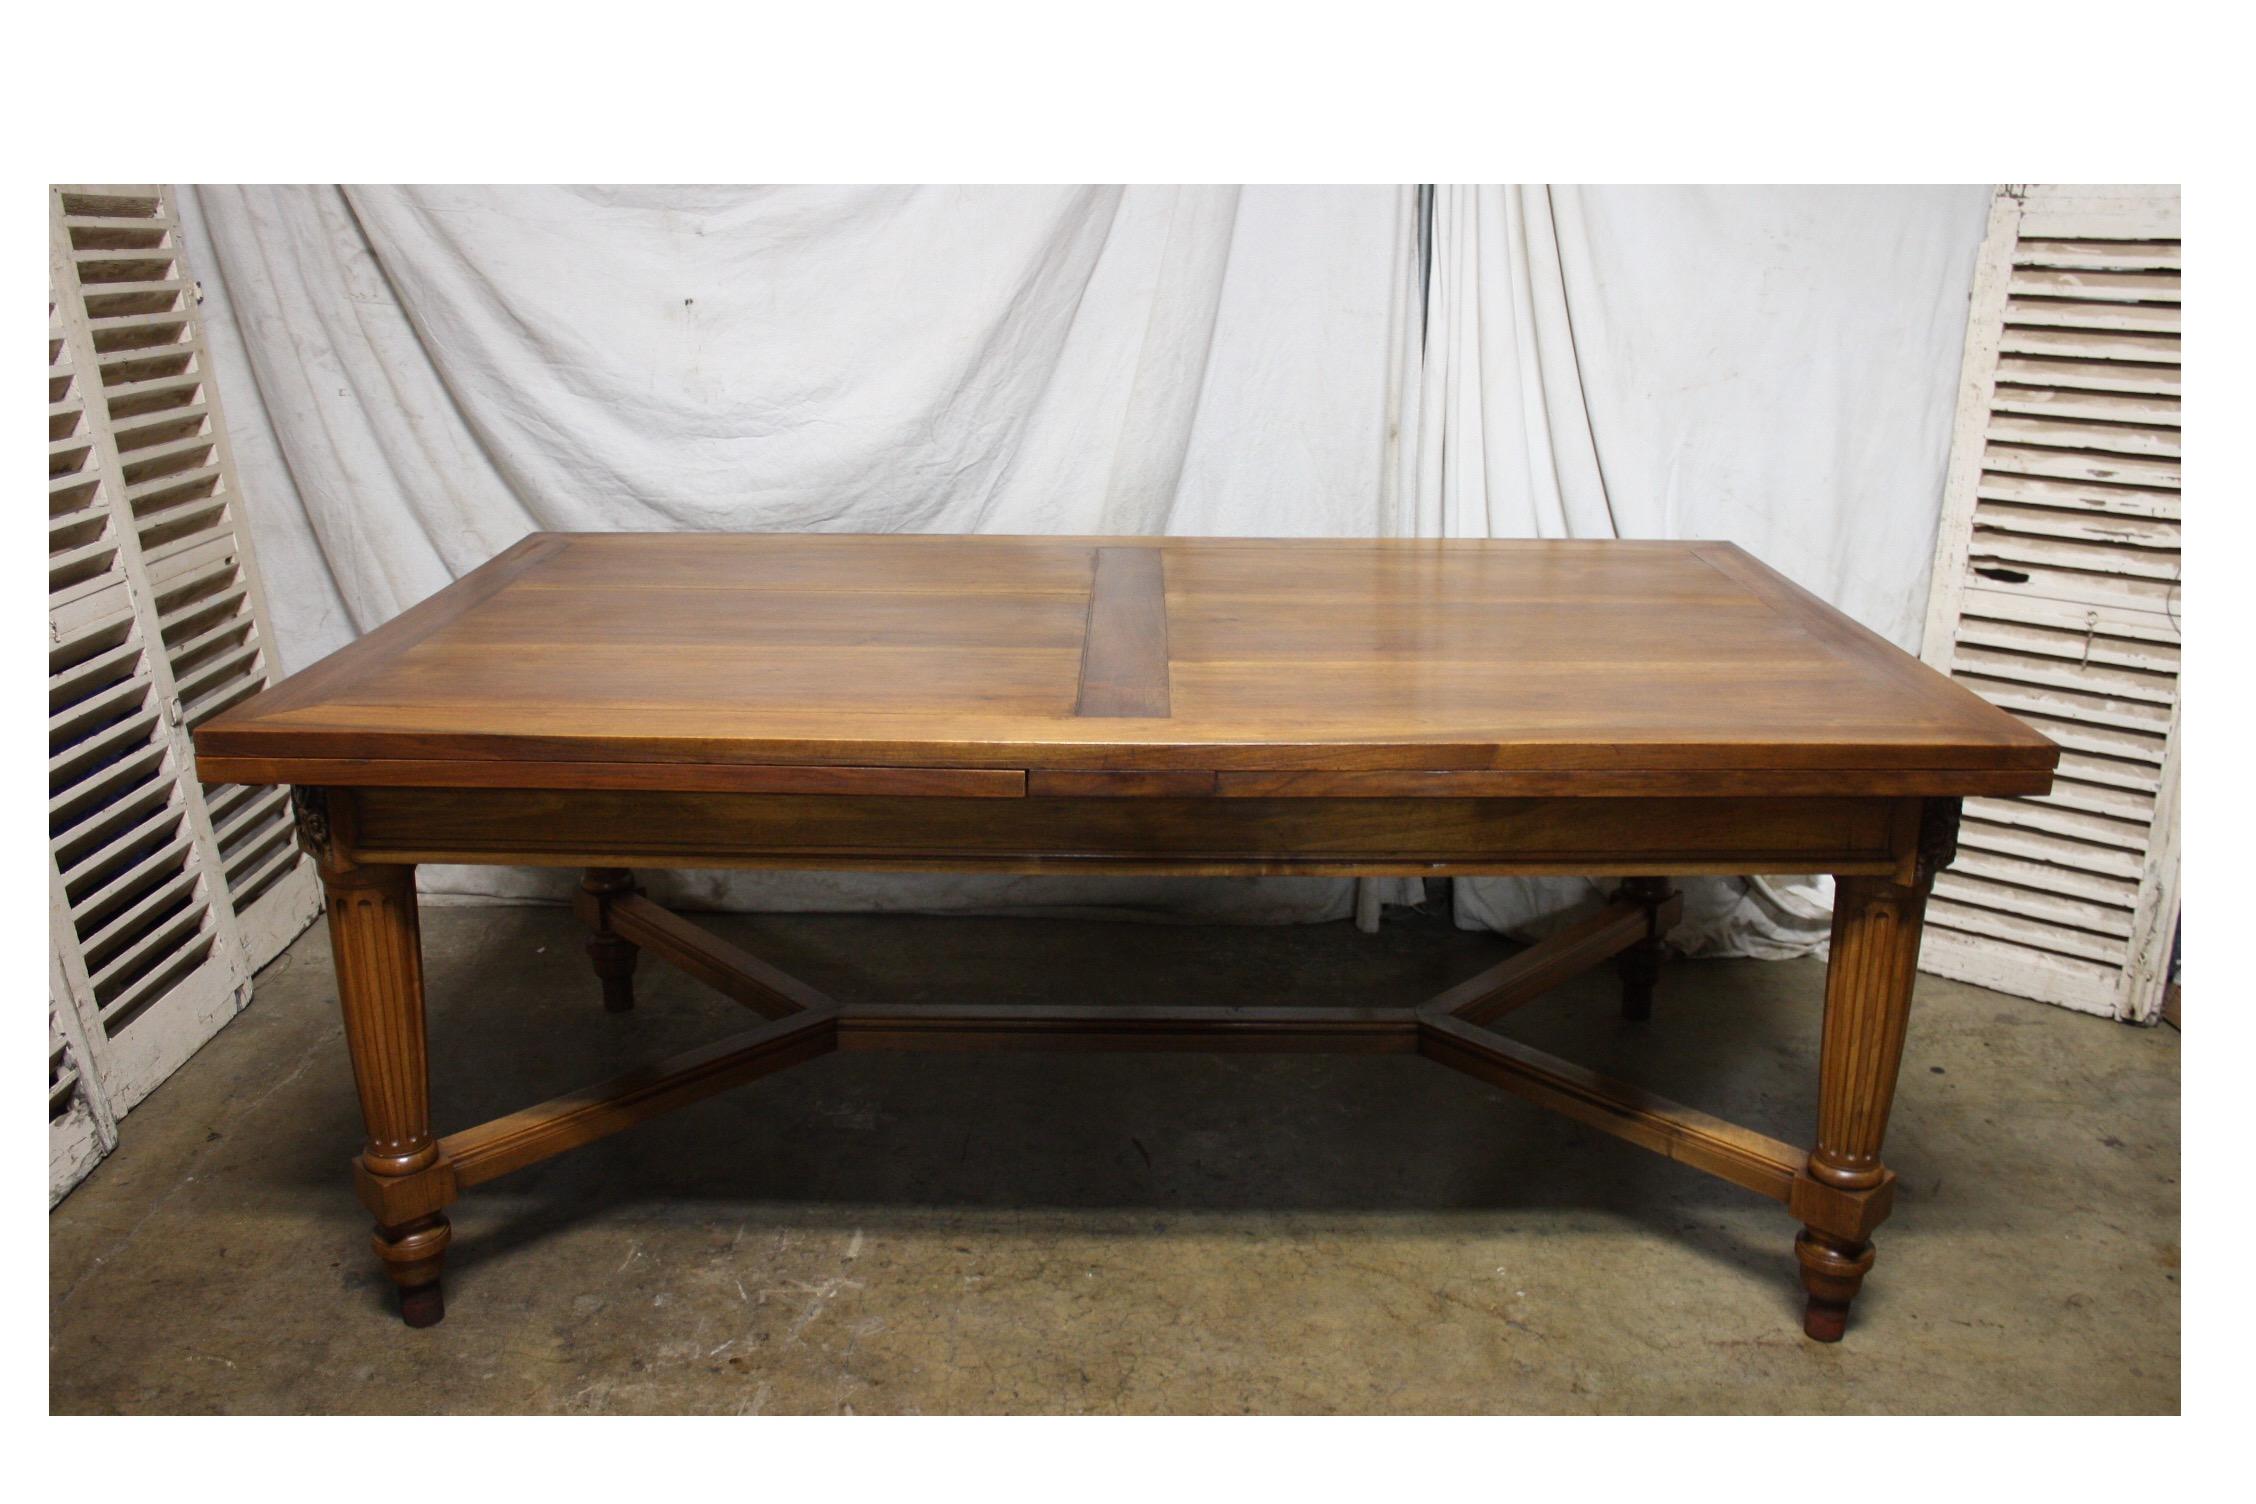 This is an amazing dining table signed 